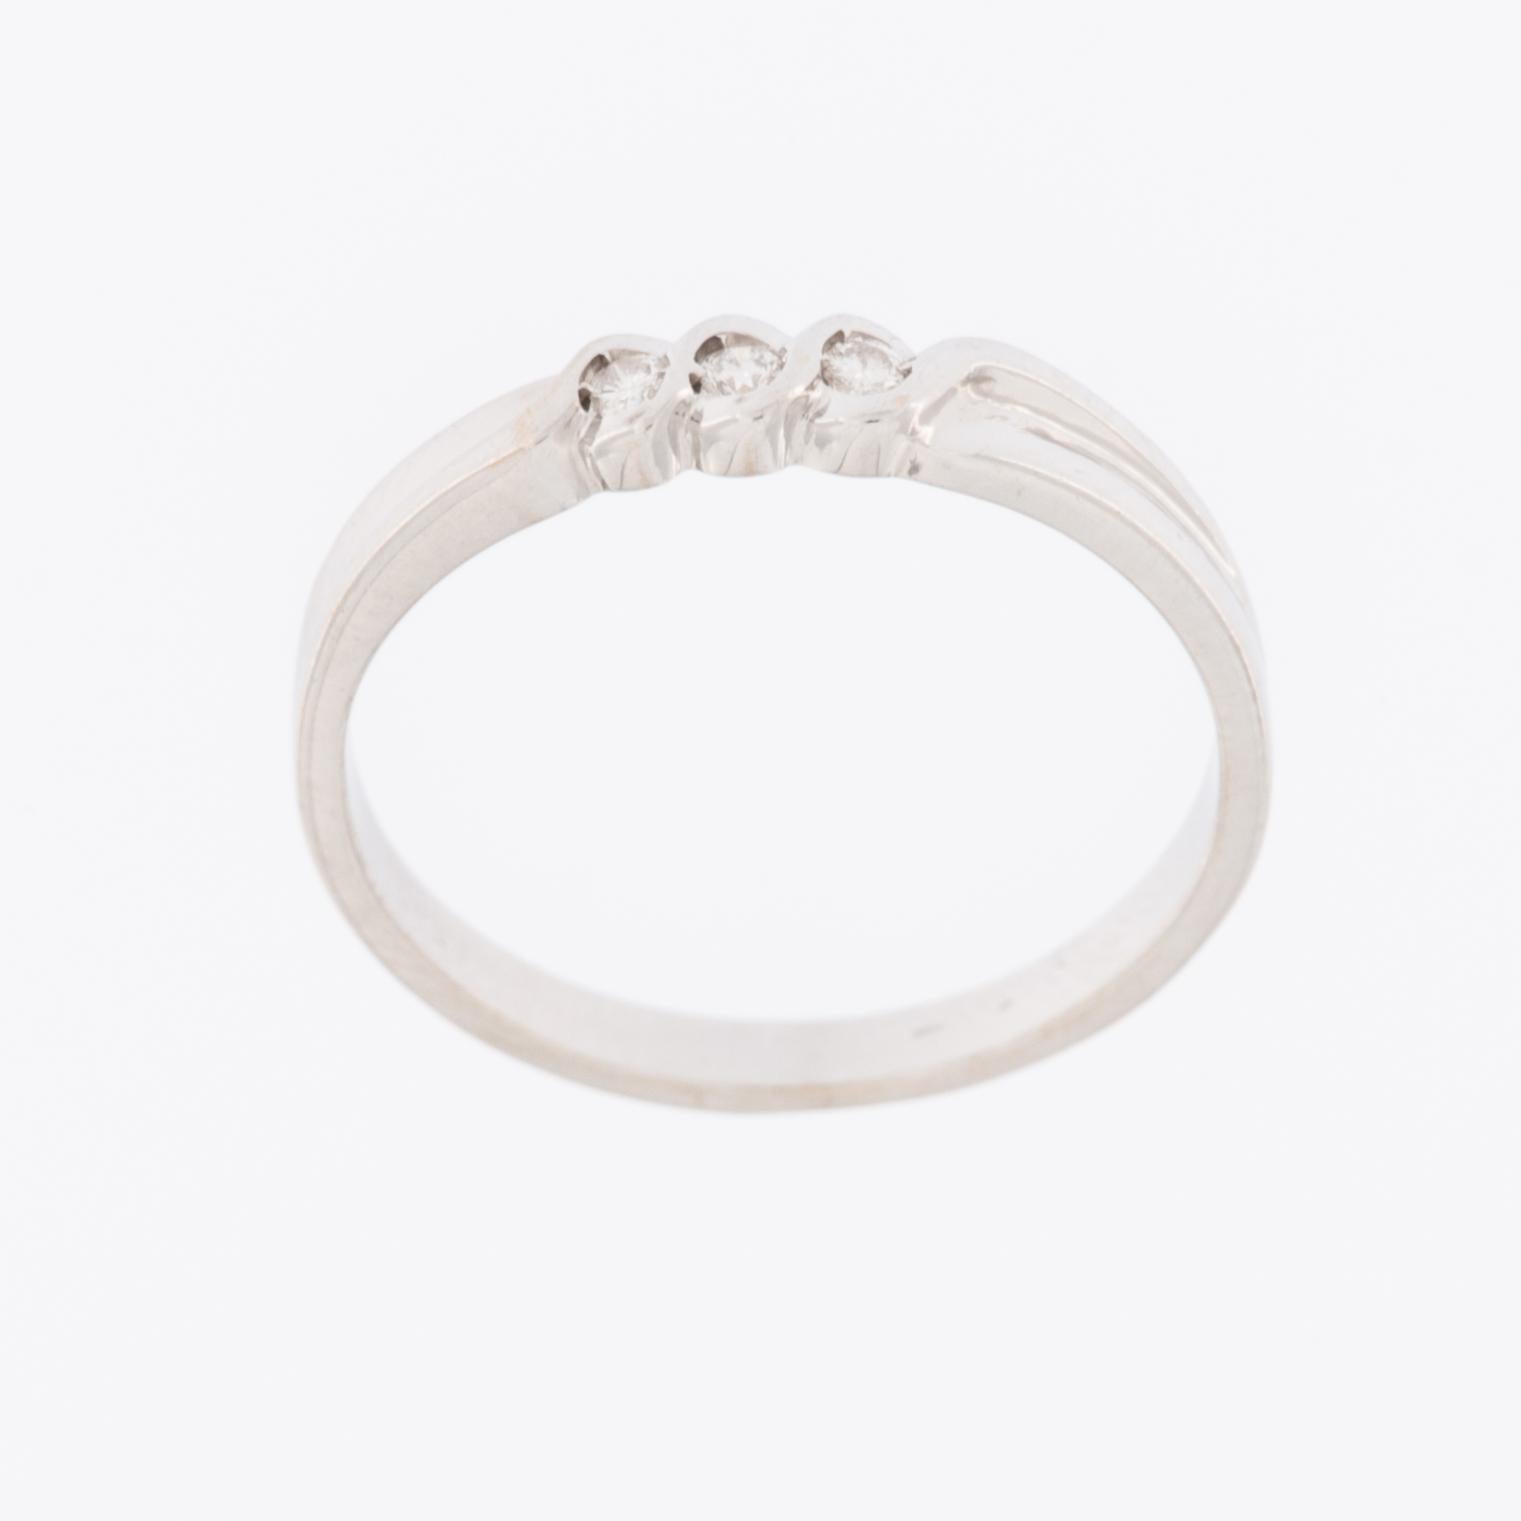 The Trilogy 18kt White Gold Ring with Diamonds is an exquisite and elegant piece of jewelry that exudes sophistication and timeless beauty. Crafted from high-quality 18-karat white gold, this ring showcases a stunning trilogy design, featuring three